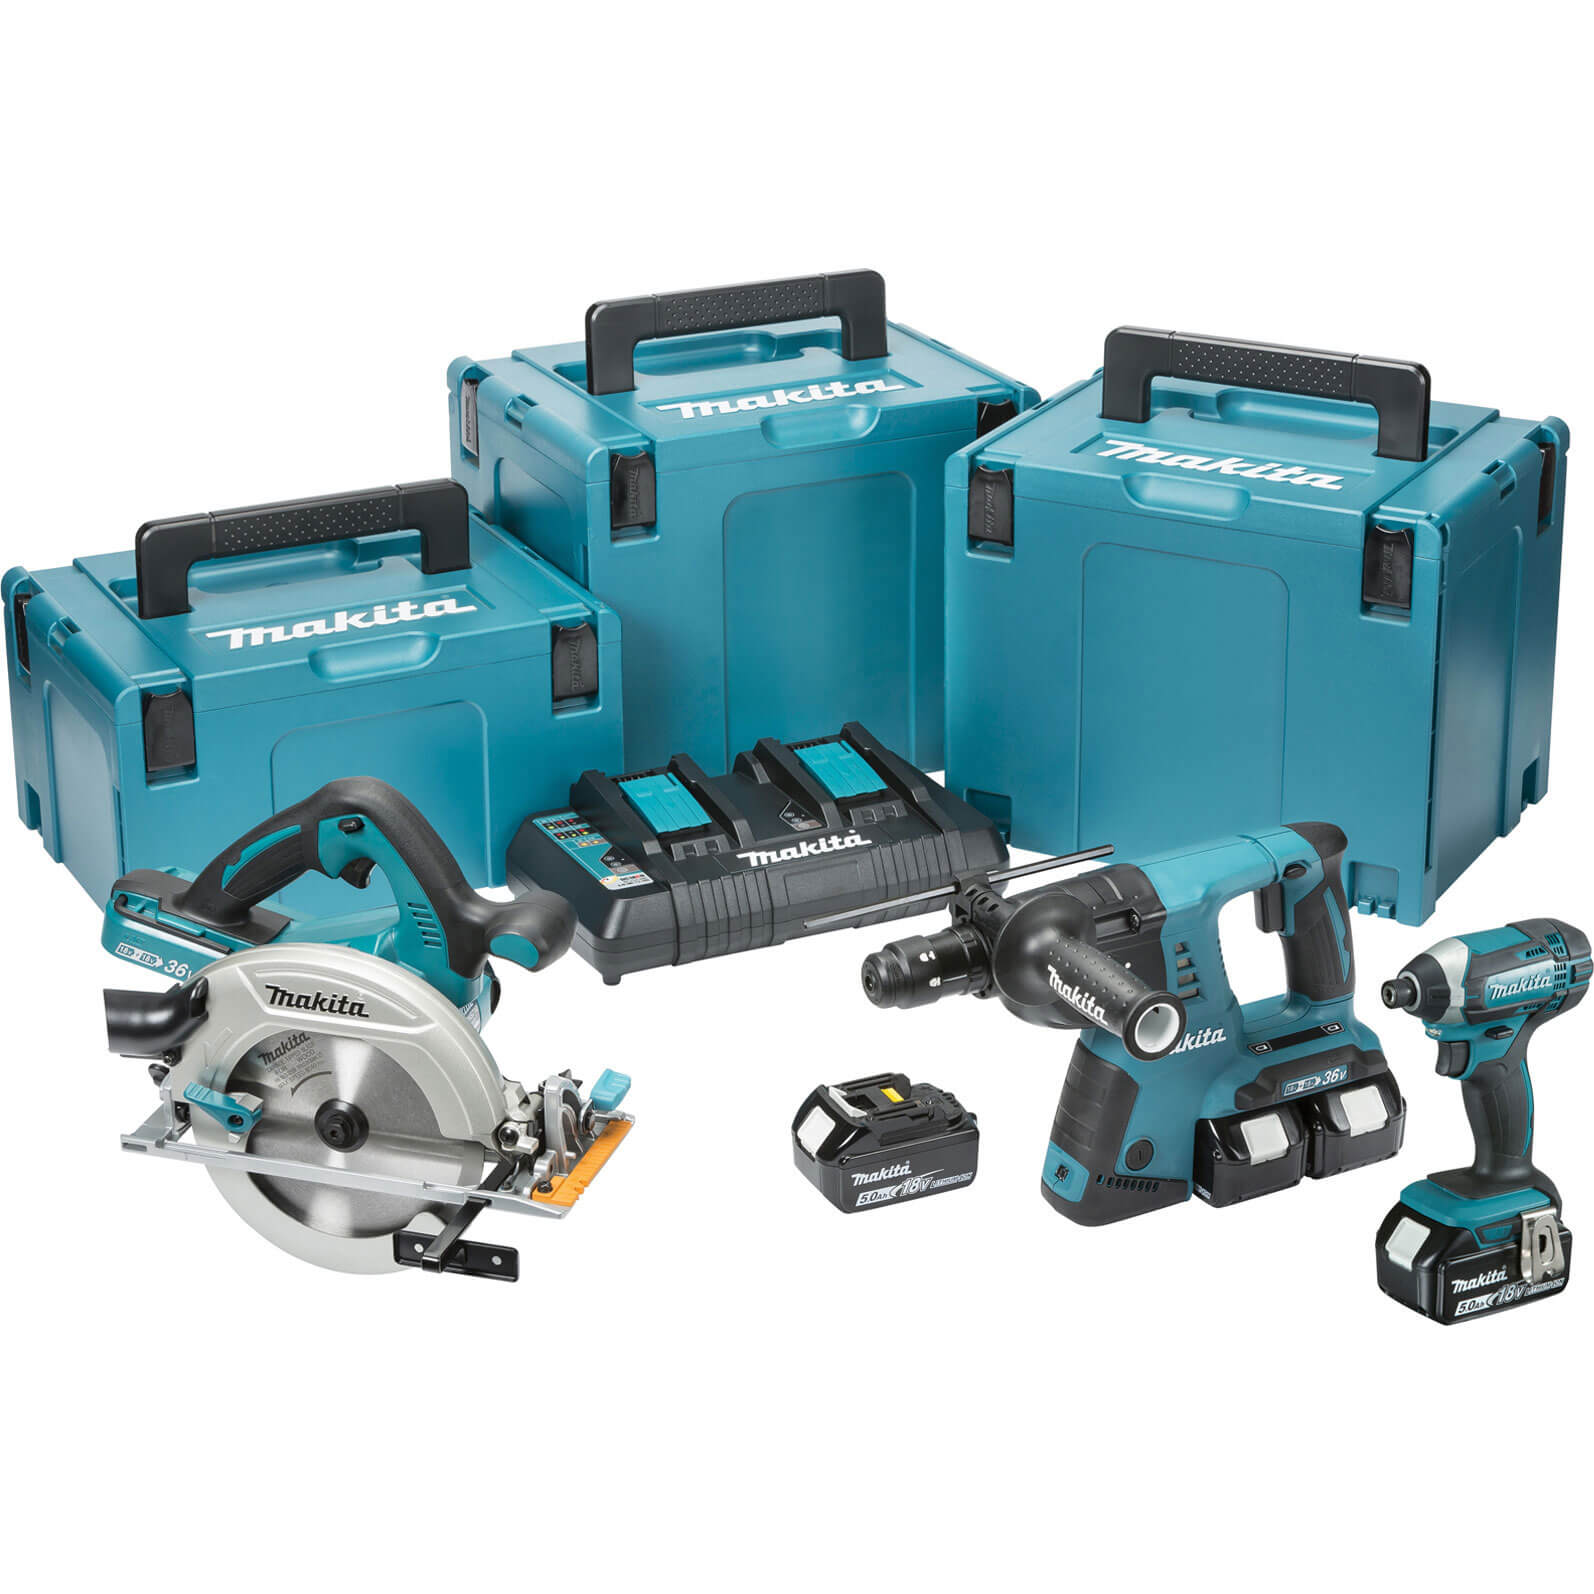 Image of Makita DLX3049PTJ 18v LXT Cordless 3 Piece Power Tool Kit 4 x 5ah Li-ion Twin Battery Charger Case